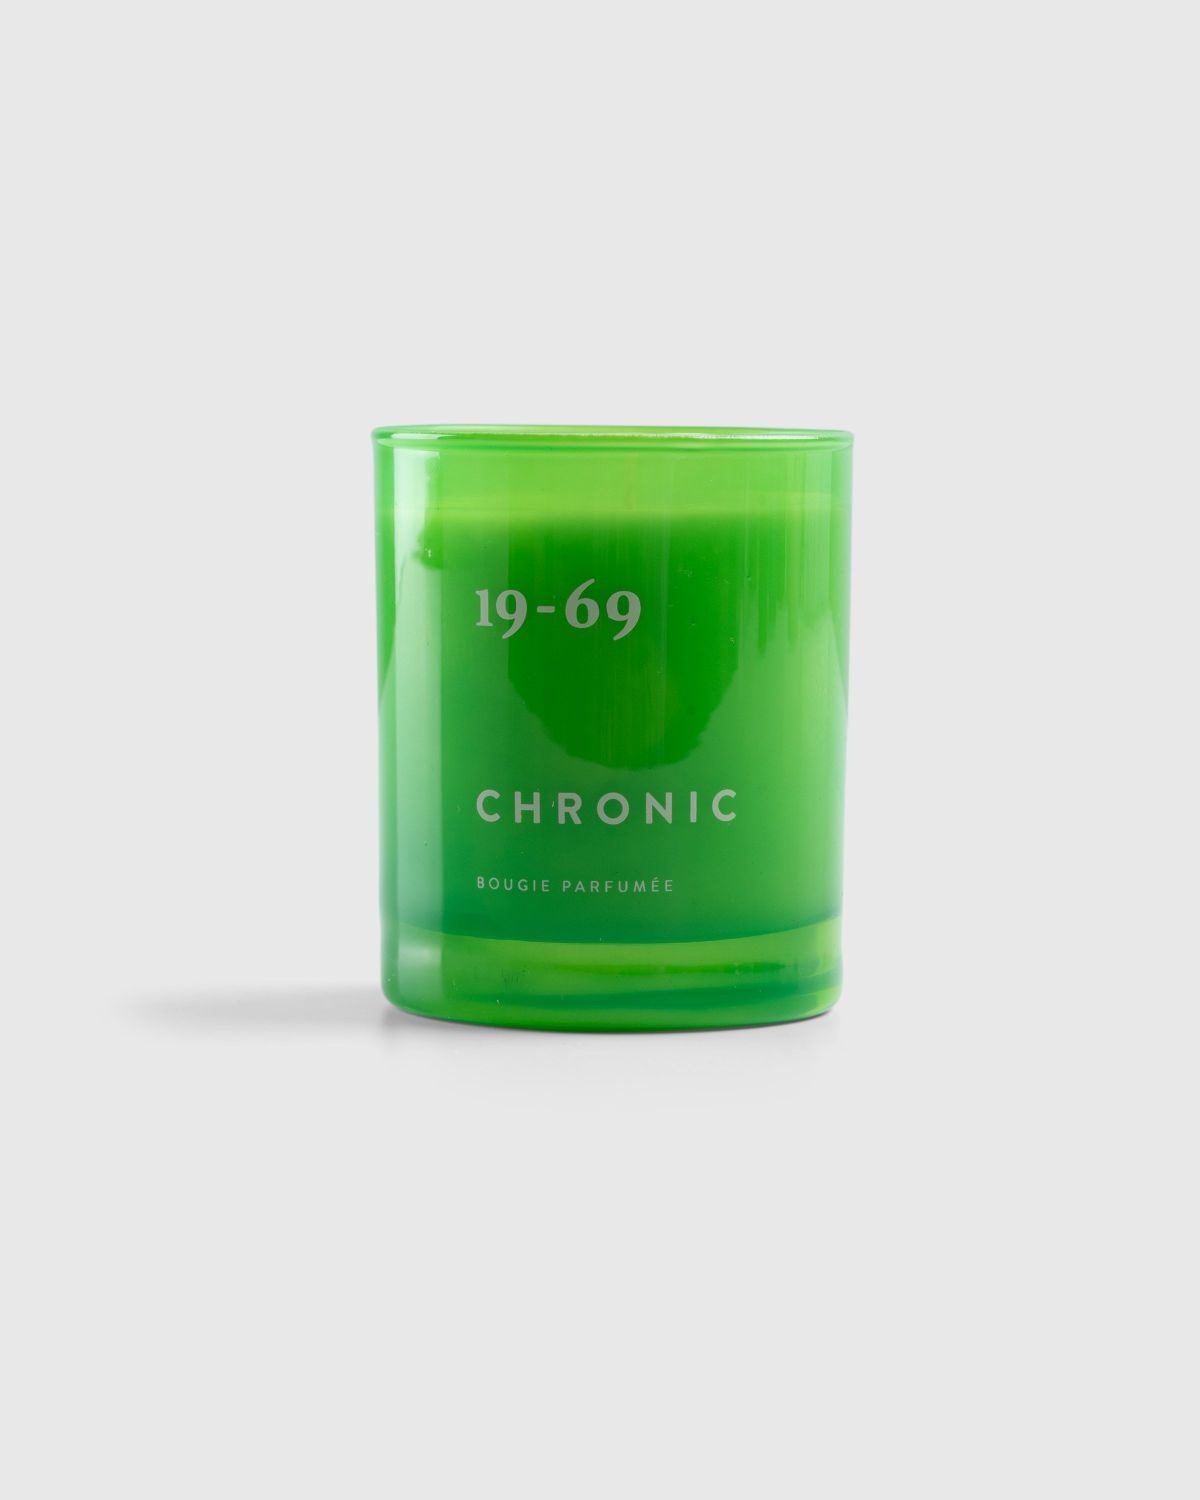 19-69 – Chronic BP Candle - Candles - Green - Image 1